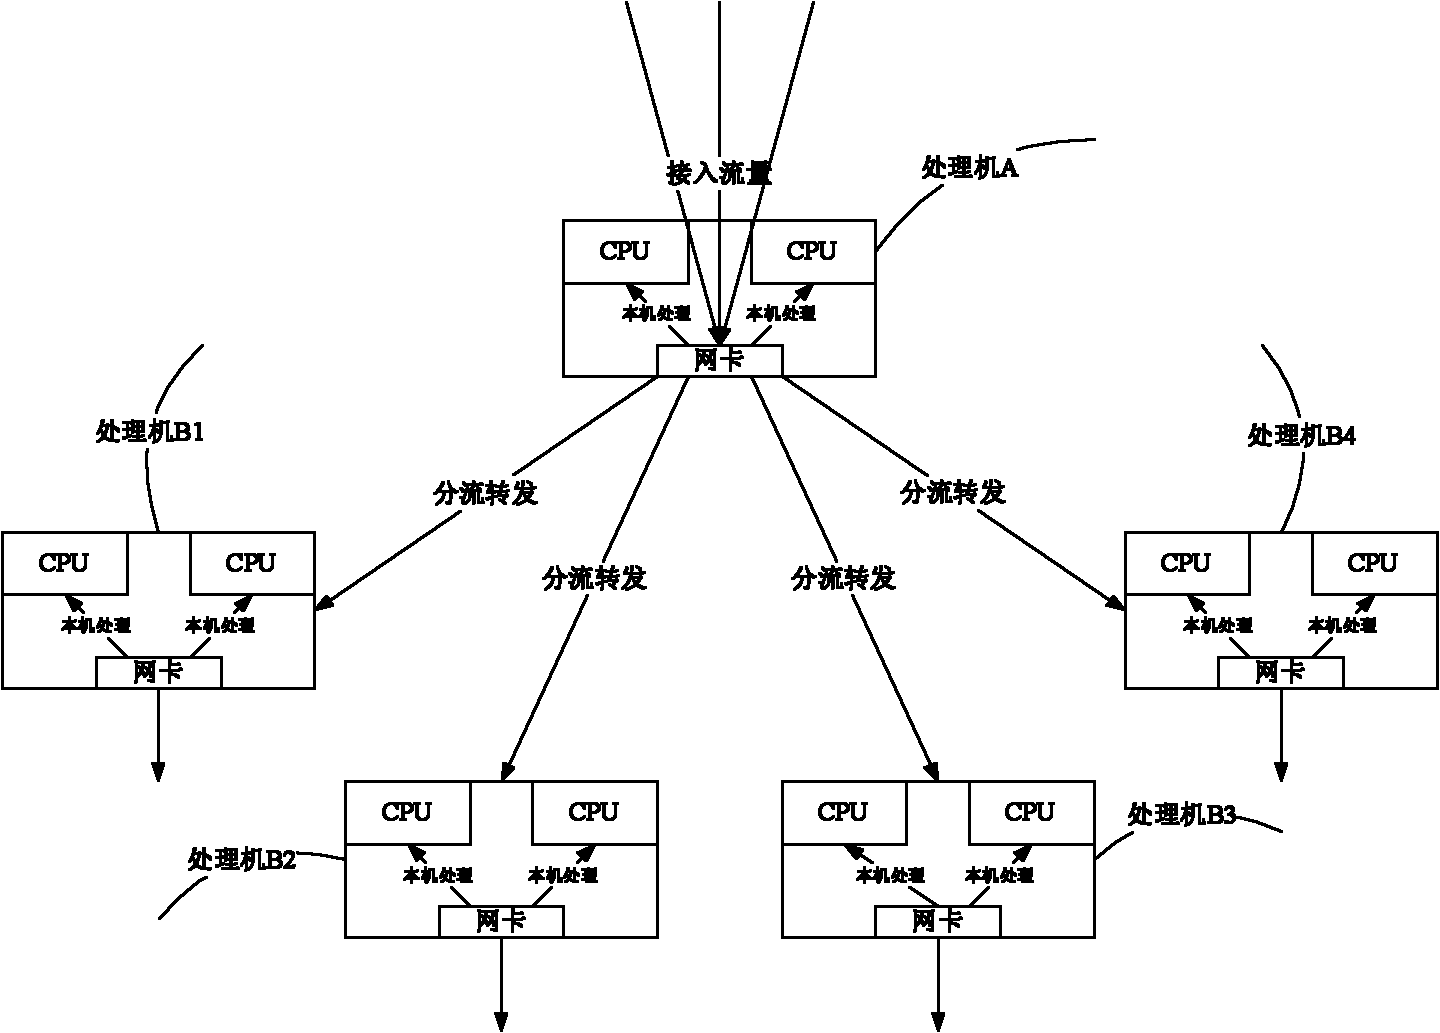 Multi-network-card load balancing system and method